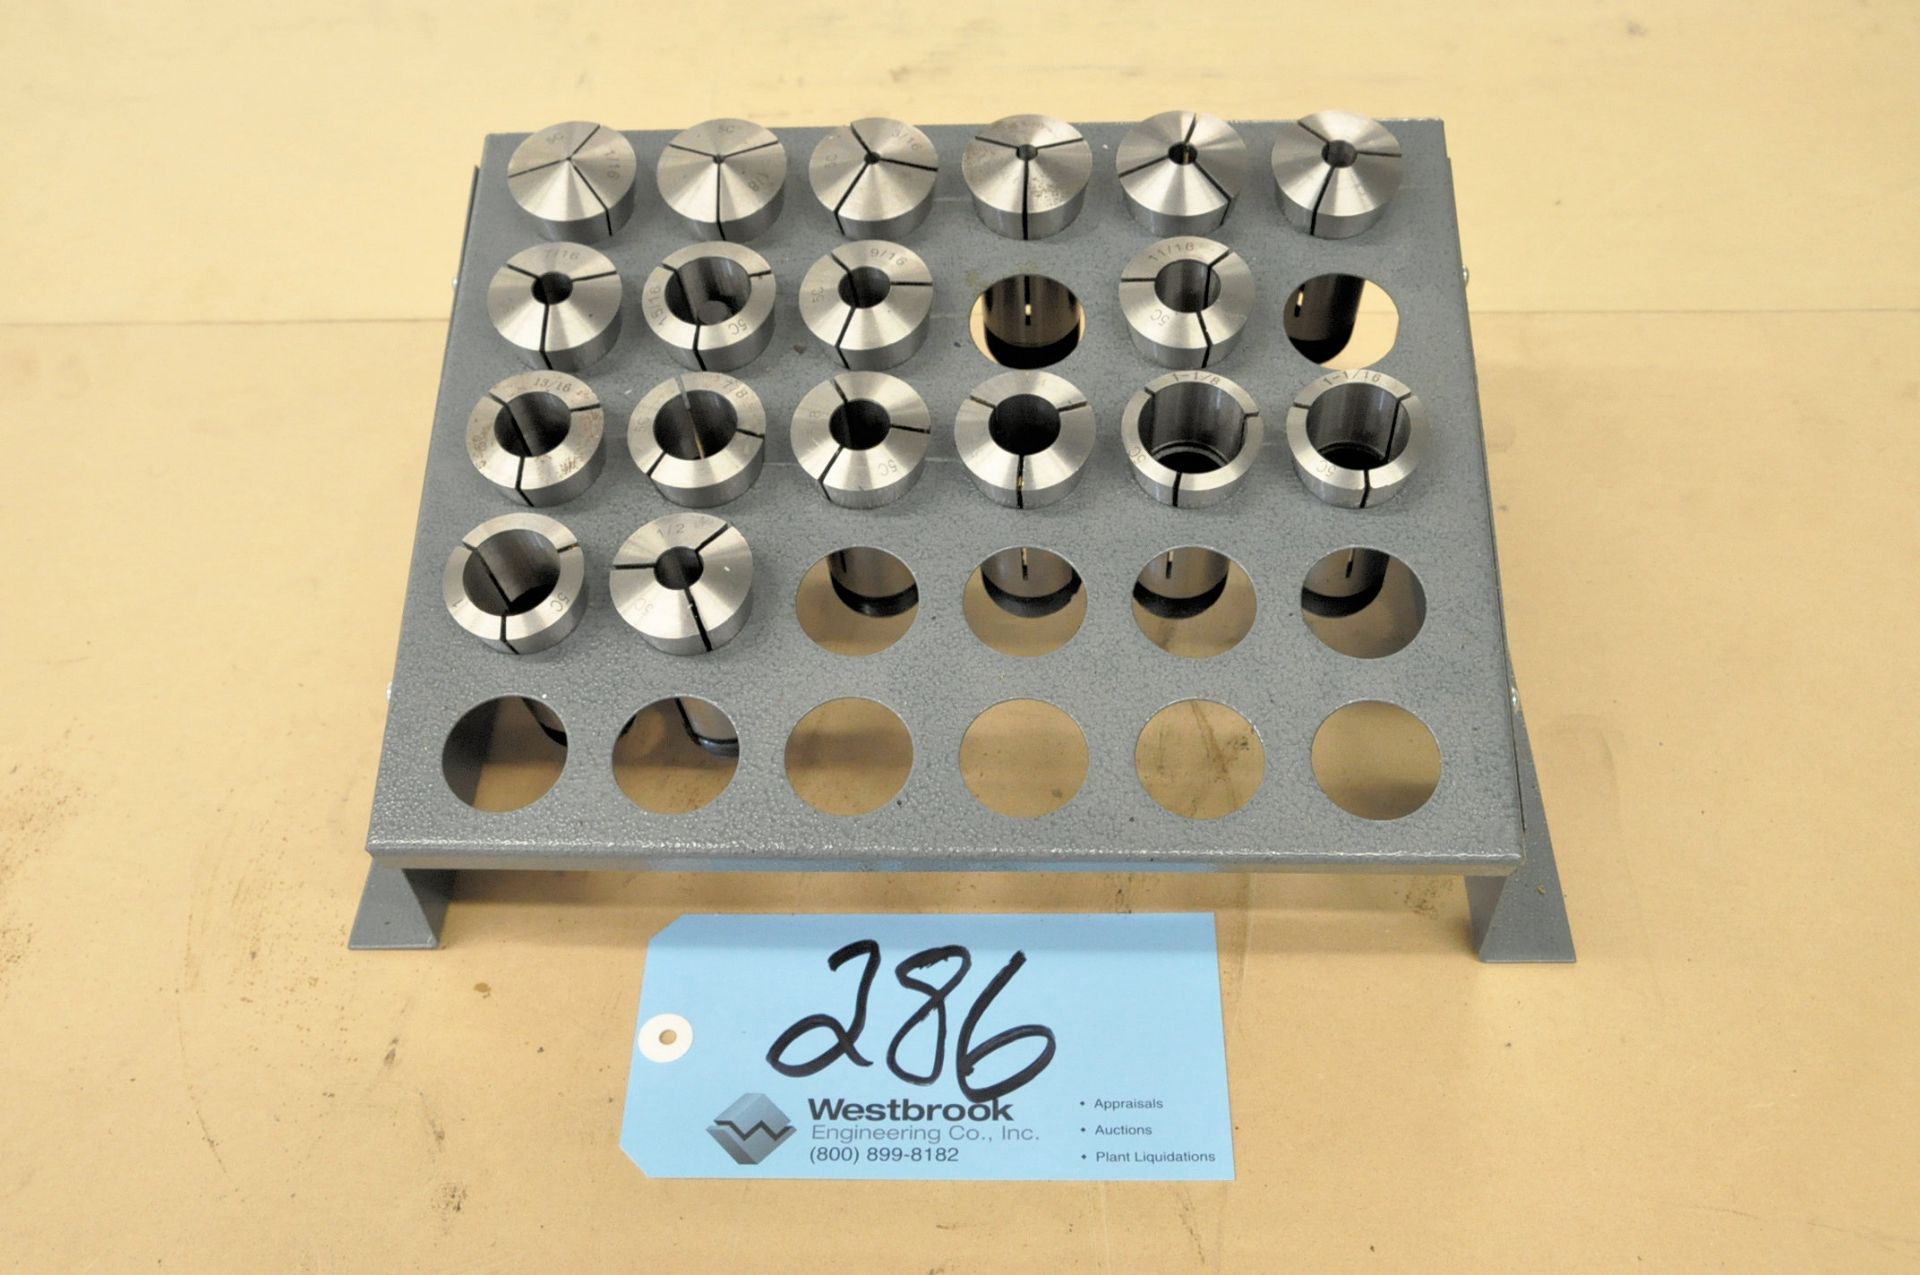 18-Piece 5C Collet Set with Stand